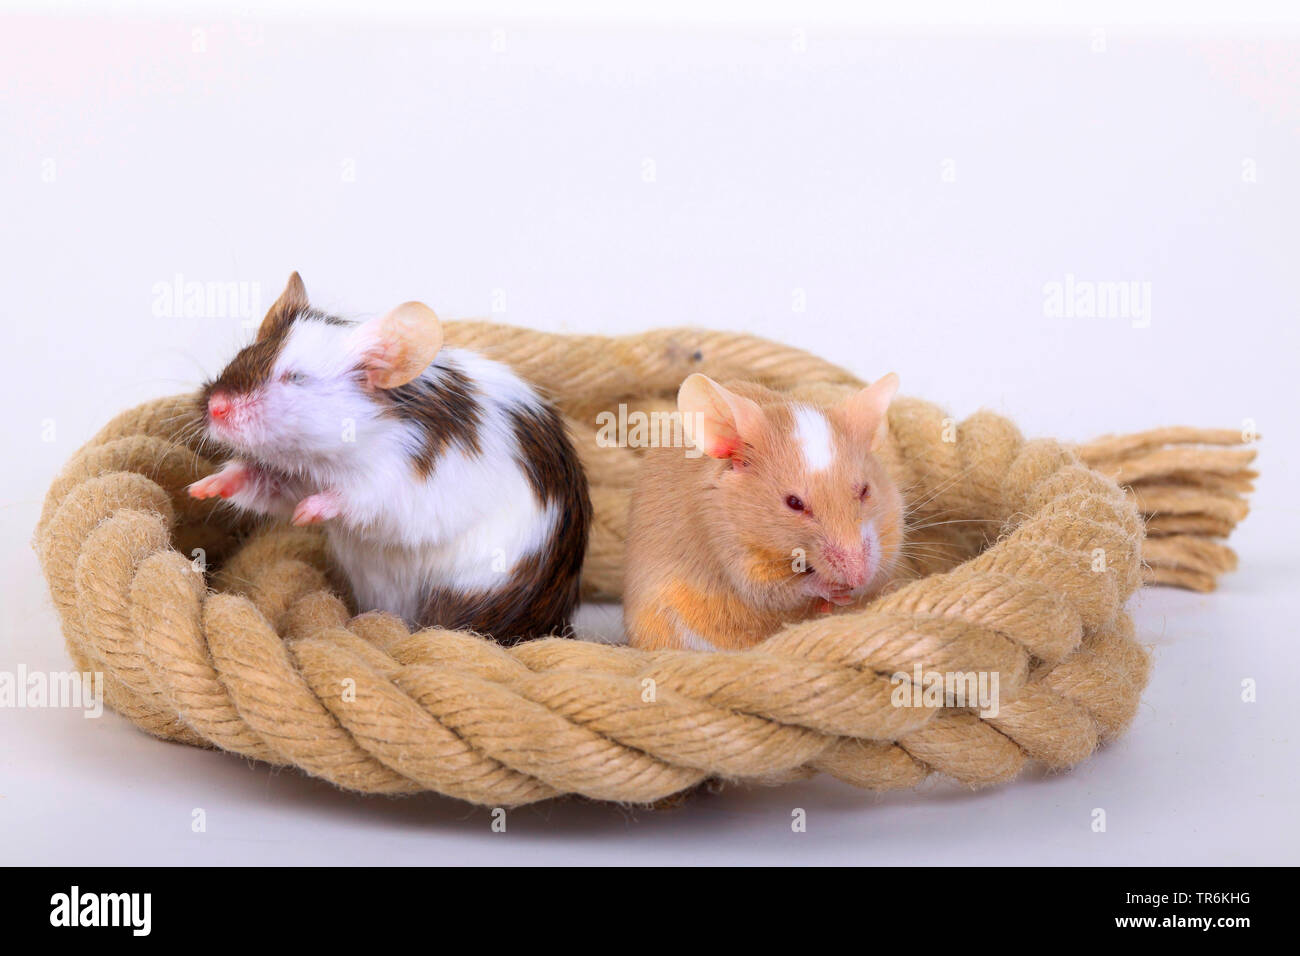 fancy mouse (Mus musculus), two fancy mice playing with a rope, Germany Stock Photo